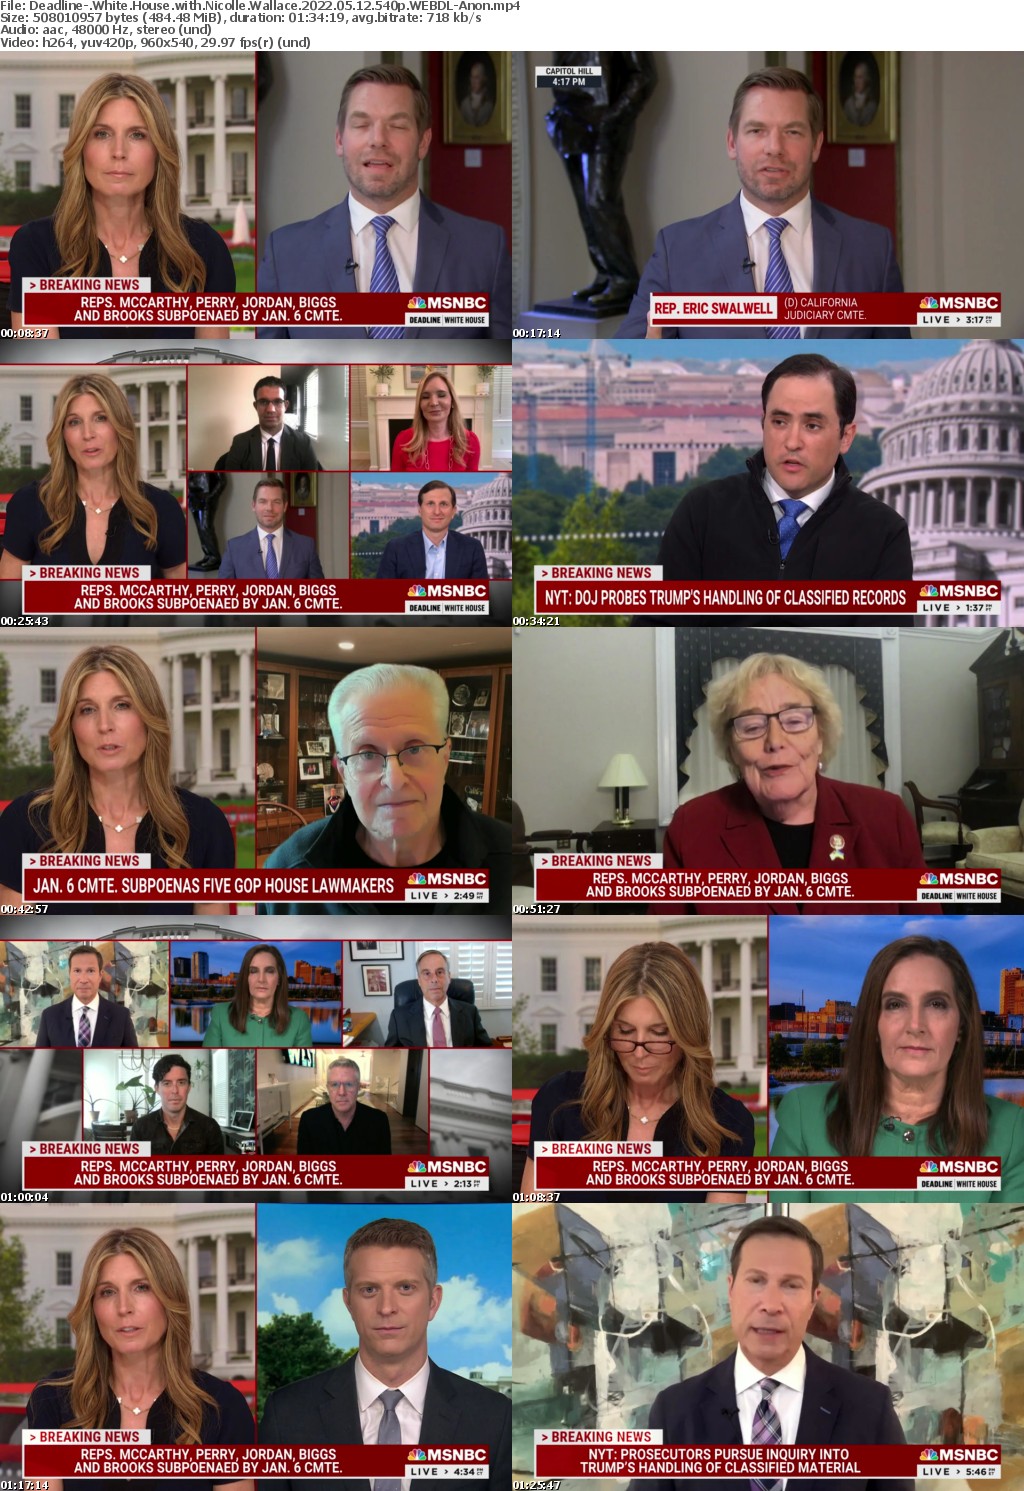 Deadline- White House with Nicolle Wallace 2022 05 12 540p WEBDL-Anon